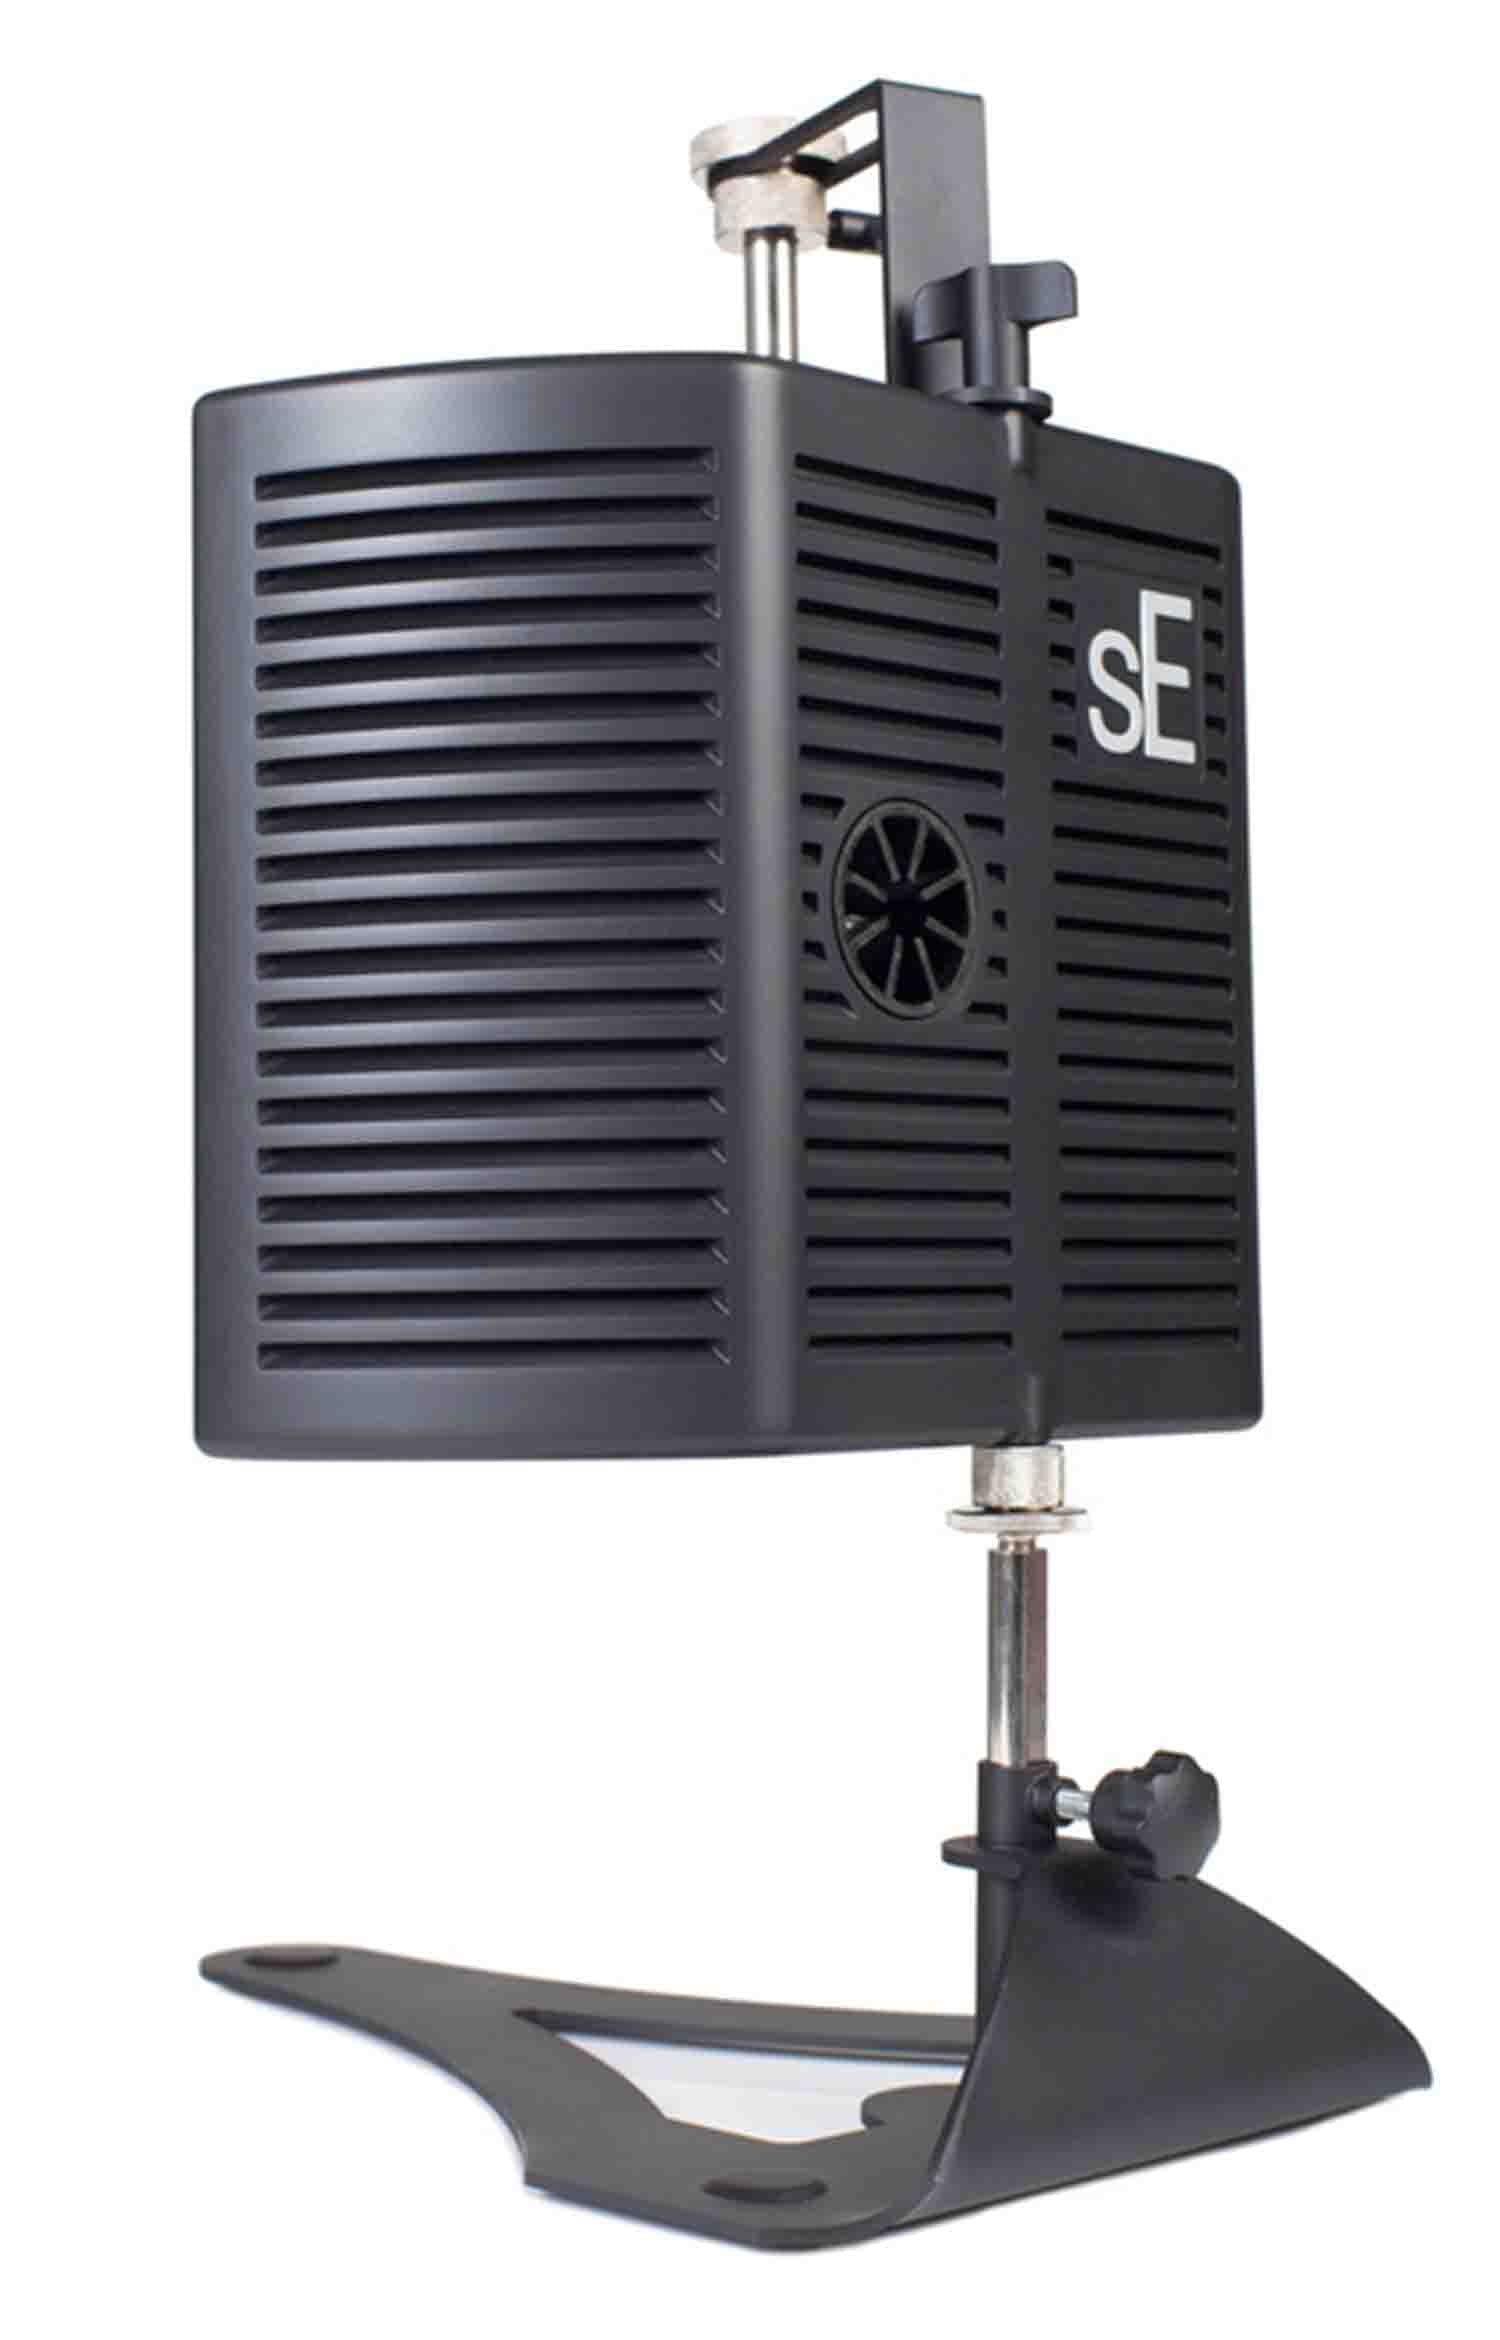 sE Electronics guitaRF Portable Isolation Filter for Dual Micing of Guitar Amplifiers - Hollywood DJ